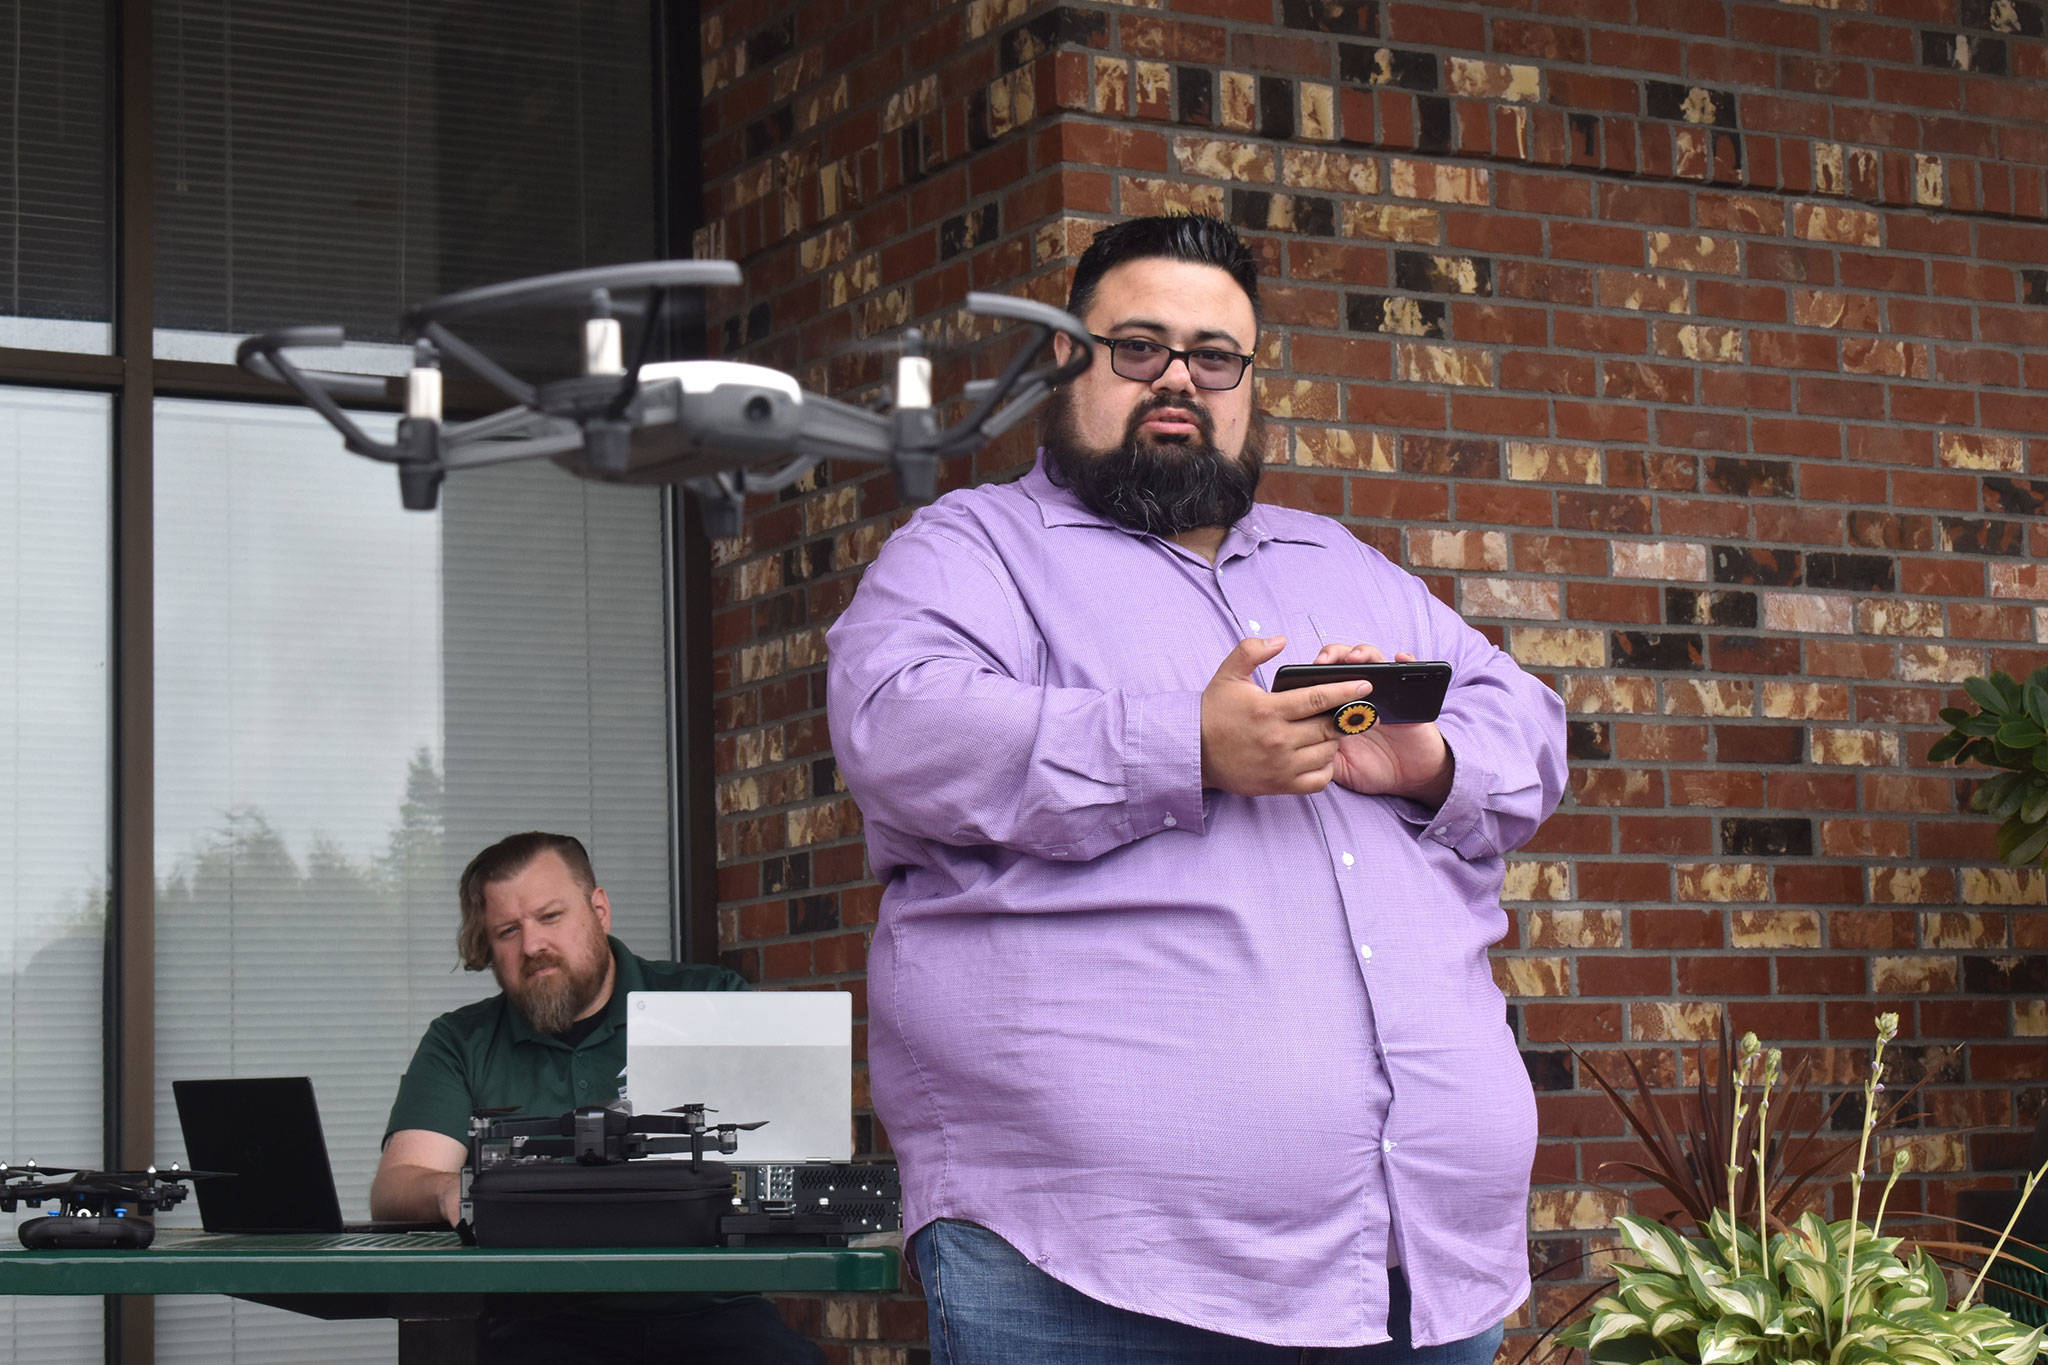 Andrew Bruce, instructor for Green River College's upcoming drone program, demonstrates the capabilities of one of his racing drones using a smartphone app outside the Enumclaw Green River campus. Photo by Alex Bruell